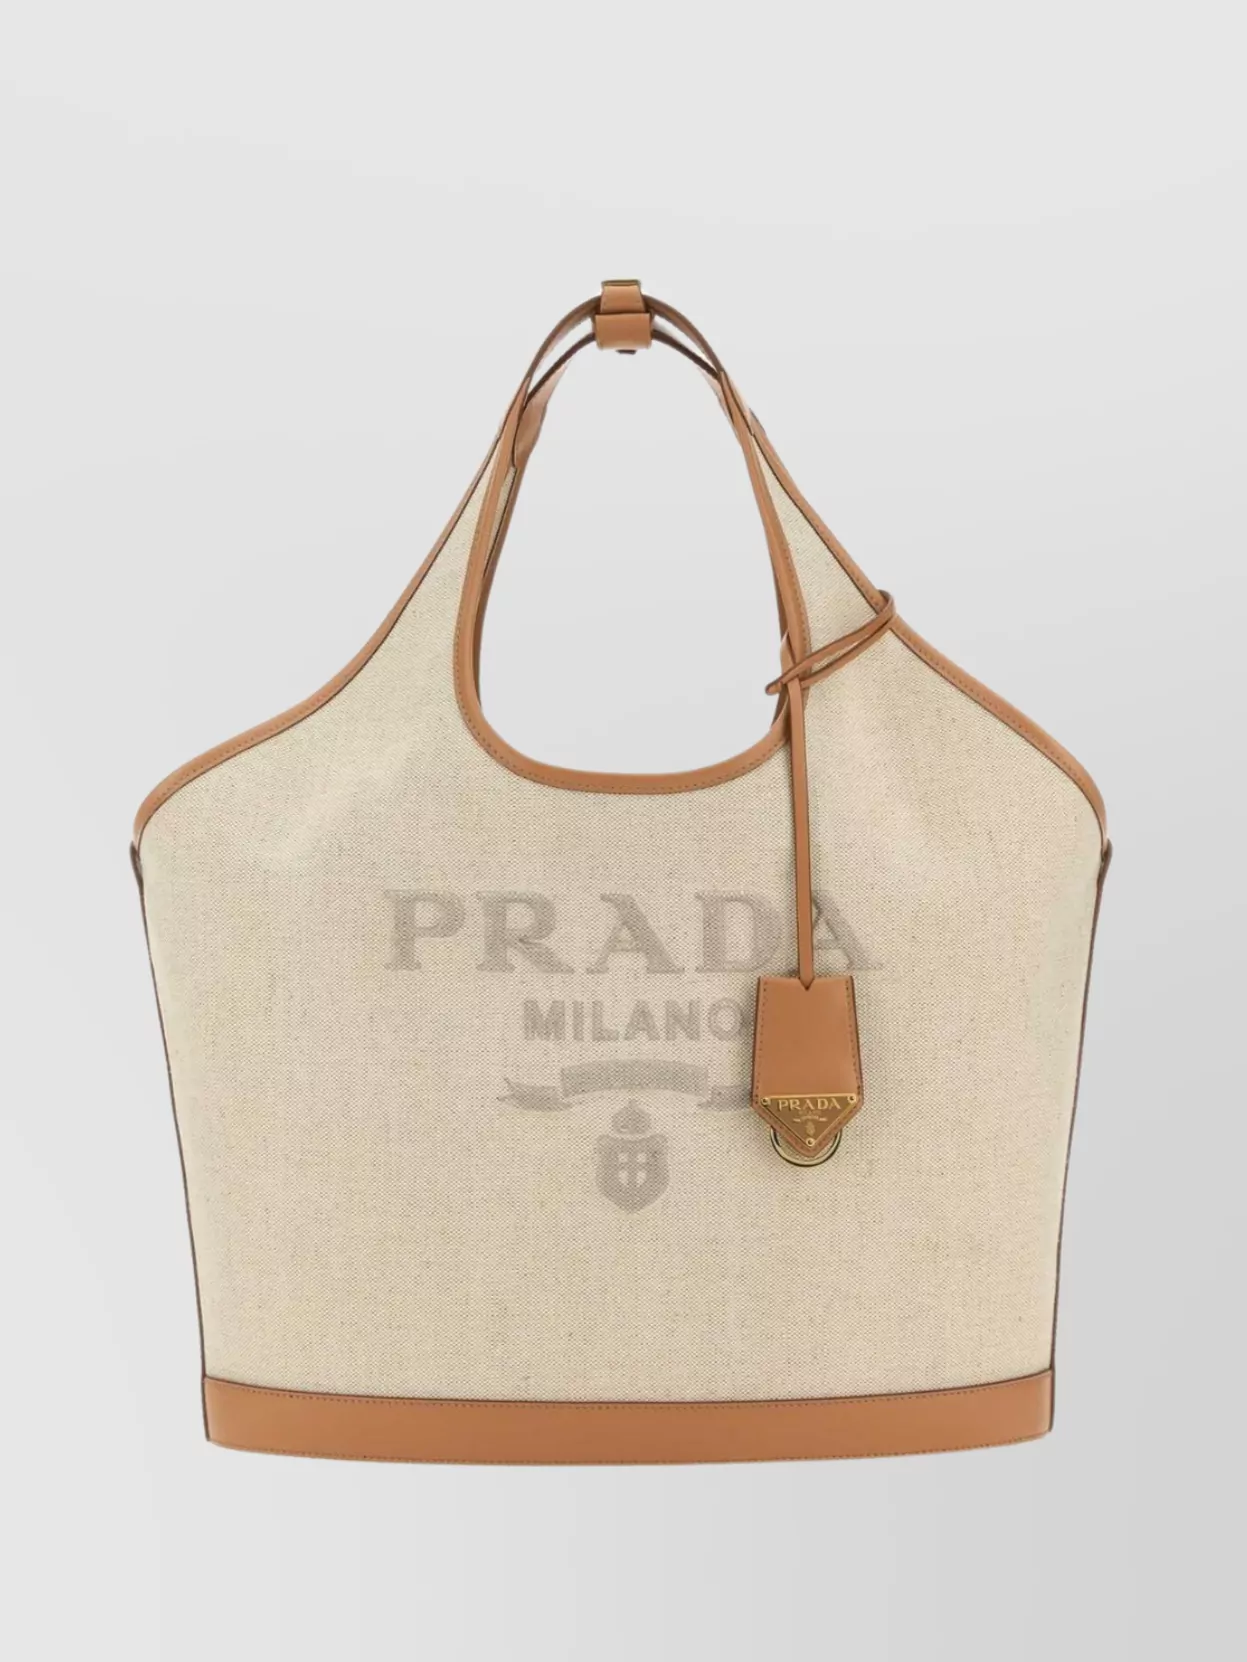 Prada Canvas And Leather Shoulder Bag In Brown